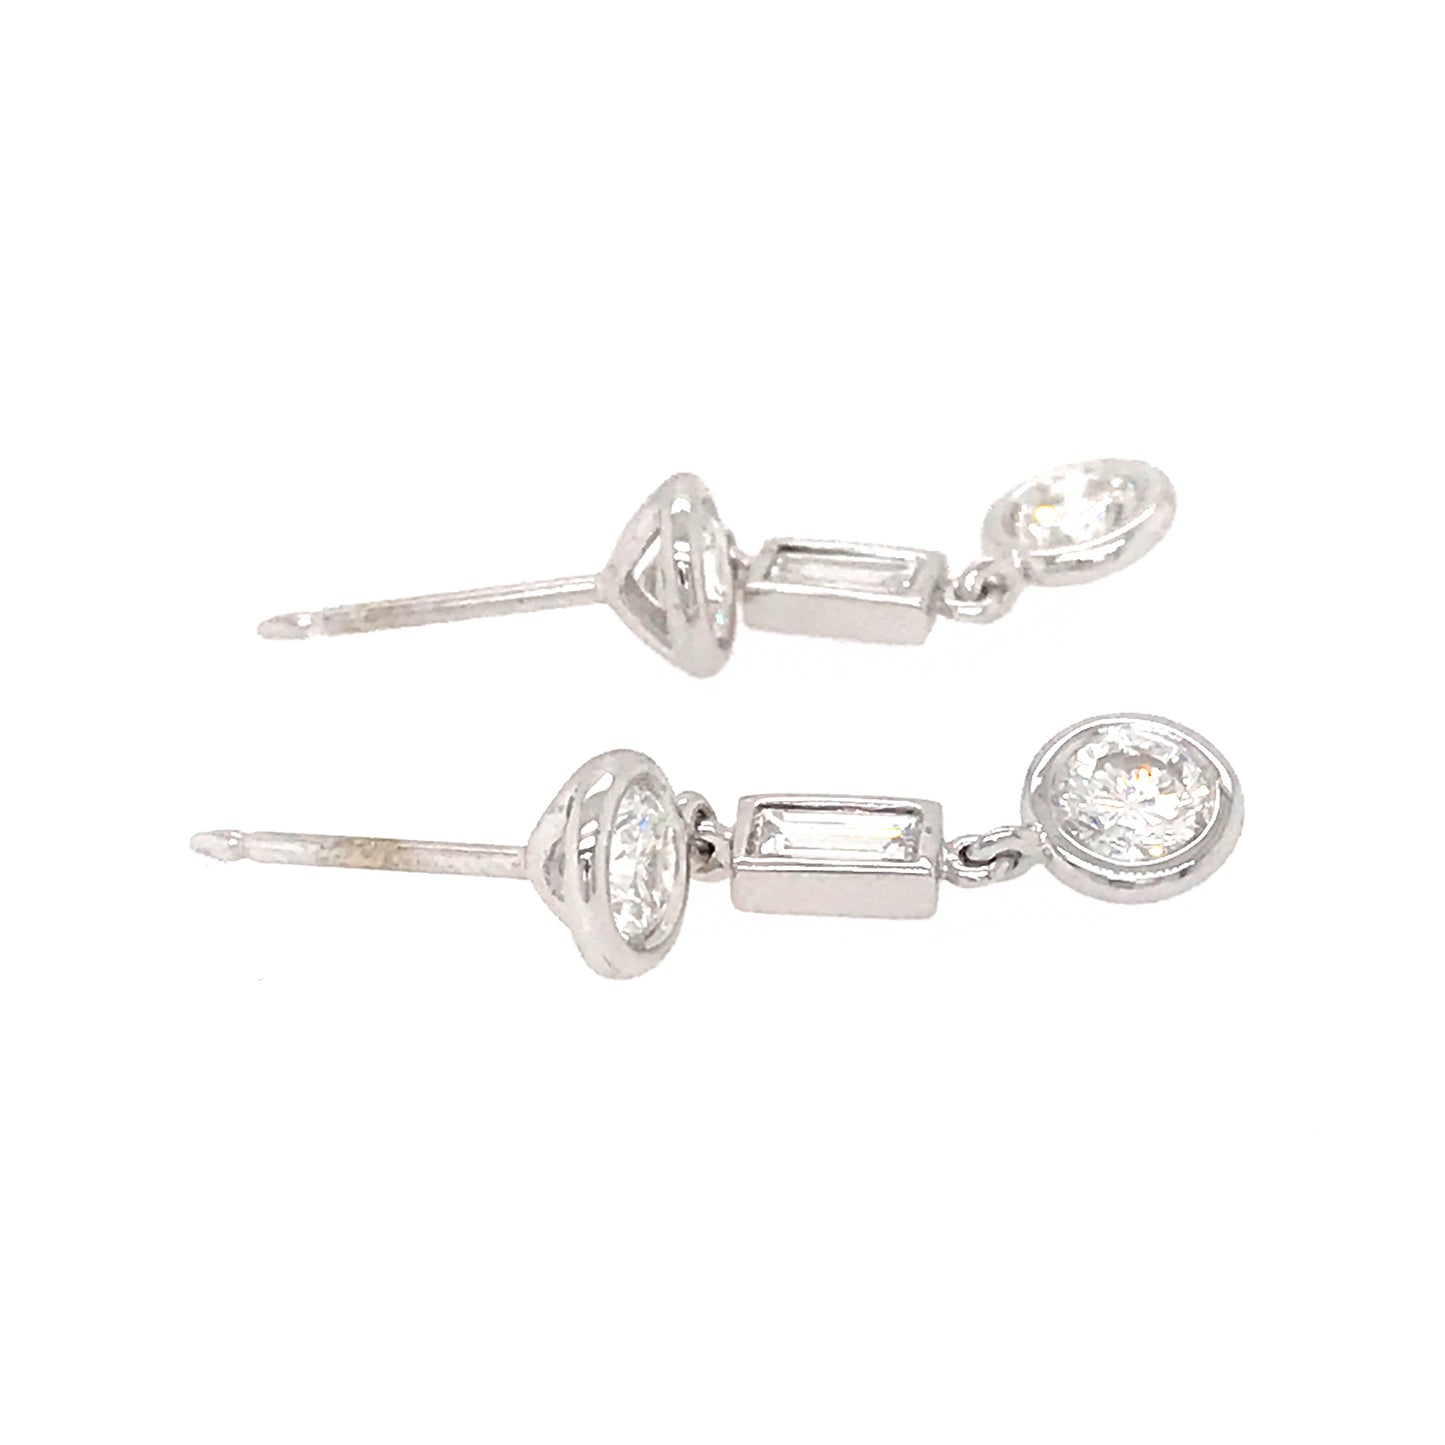 Fab Drops 14k White Gold Baguettes and Round Diamond Drop Earrings